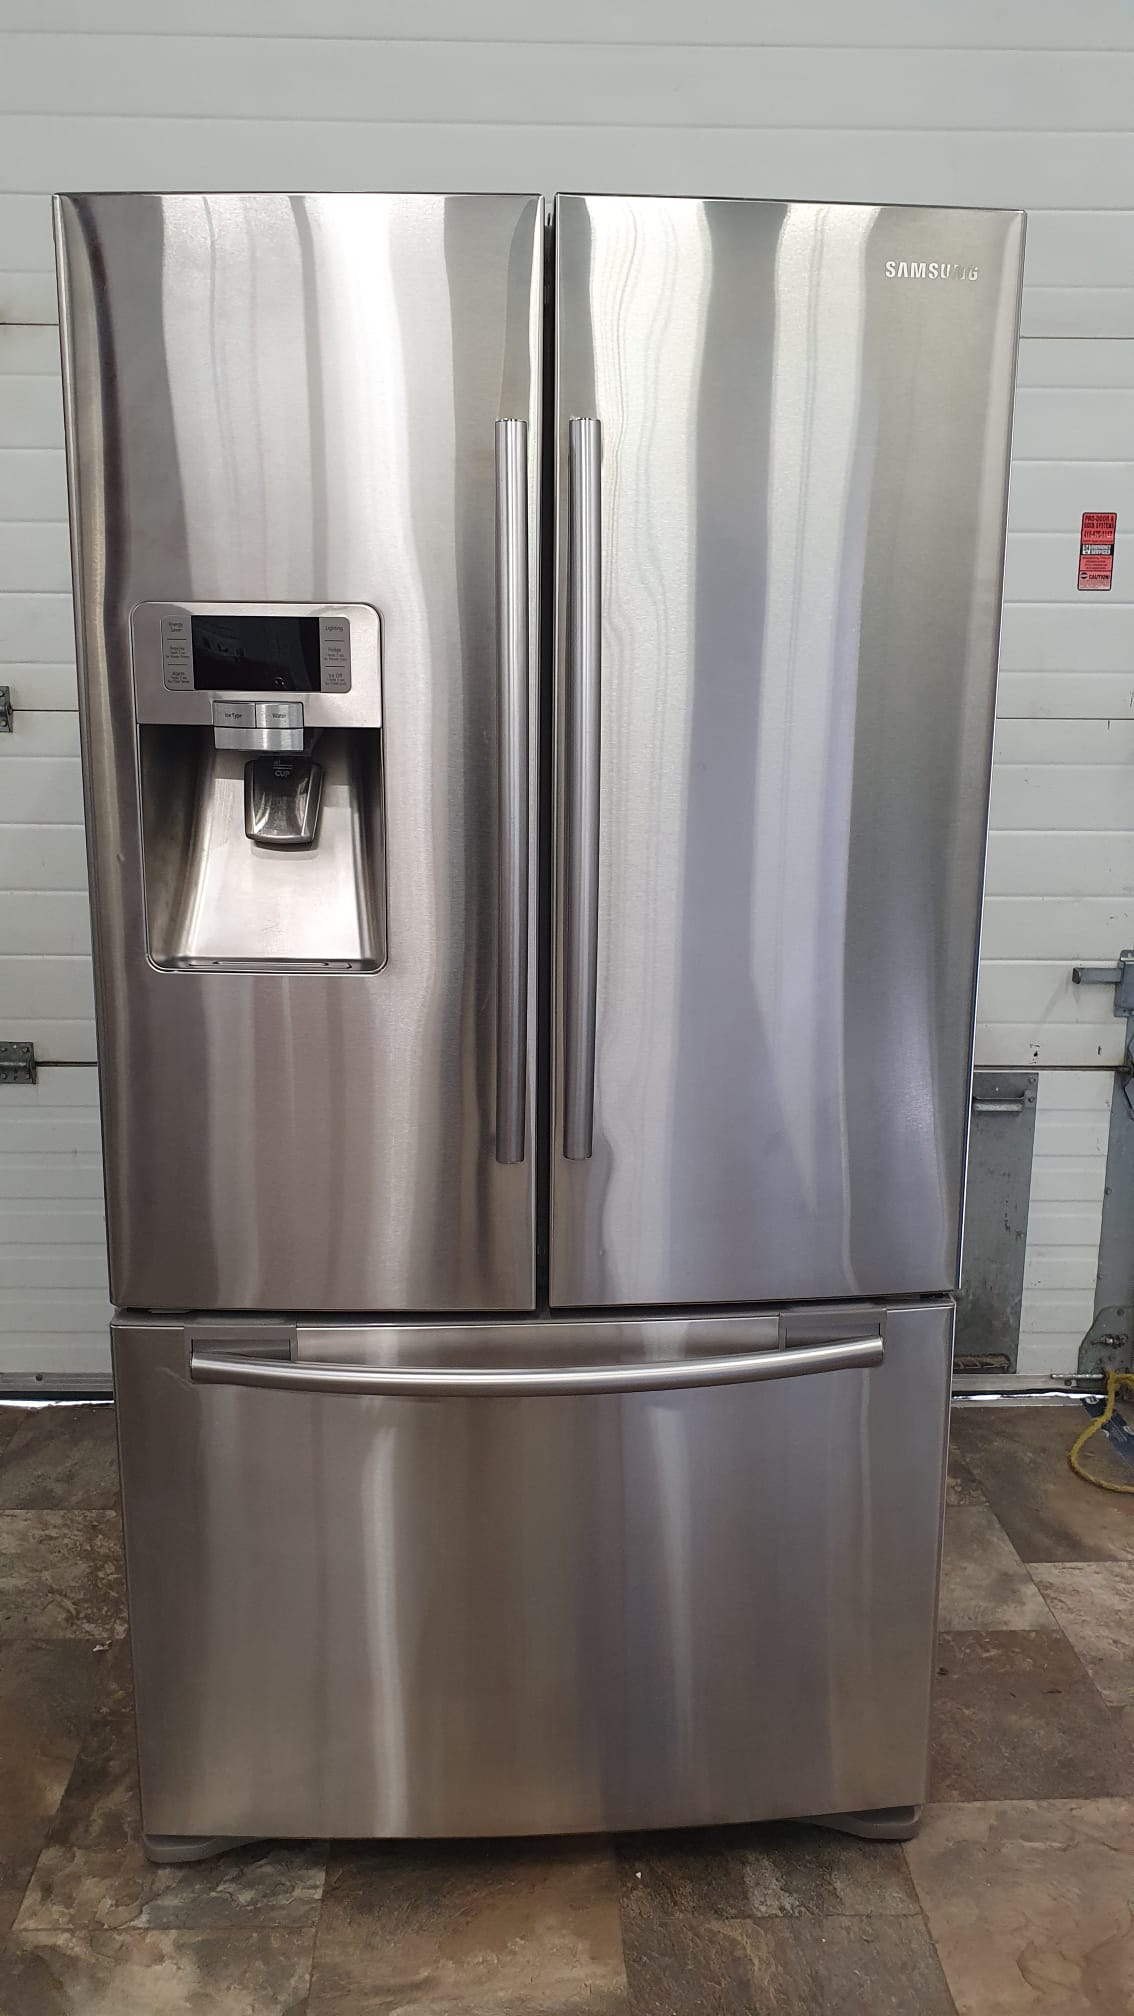 Order Your Used Refrigerator Samsung Rfg237acrs/xac Today!